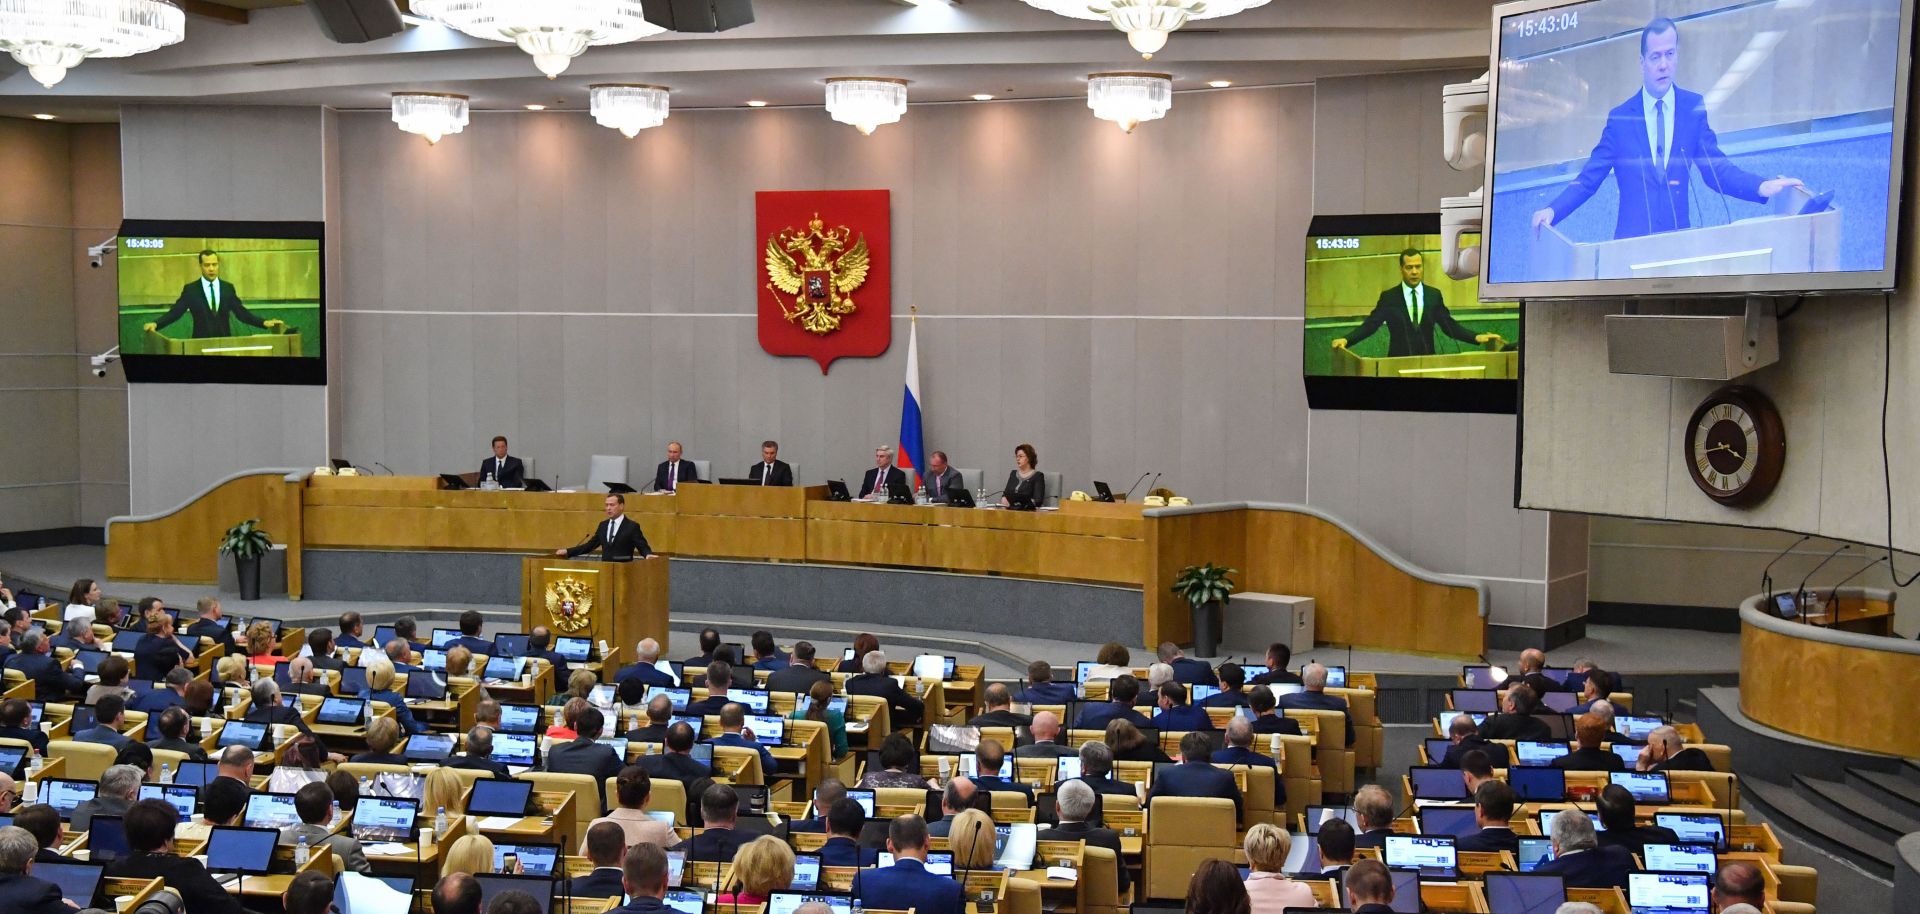 The State Duma of Russia is still dominated by President Vladimir Putin's party, even though other political parties are starting to make inroads.